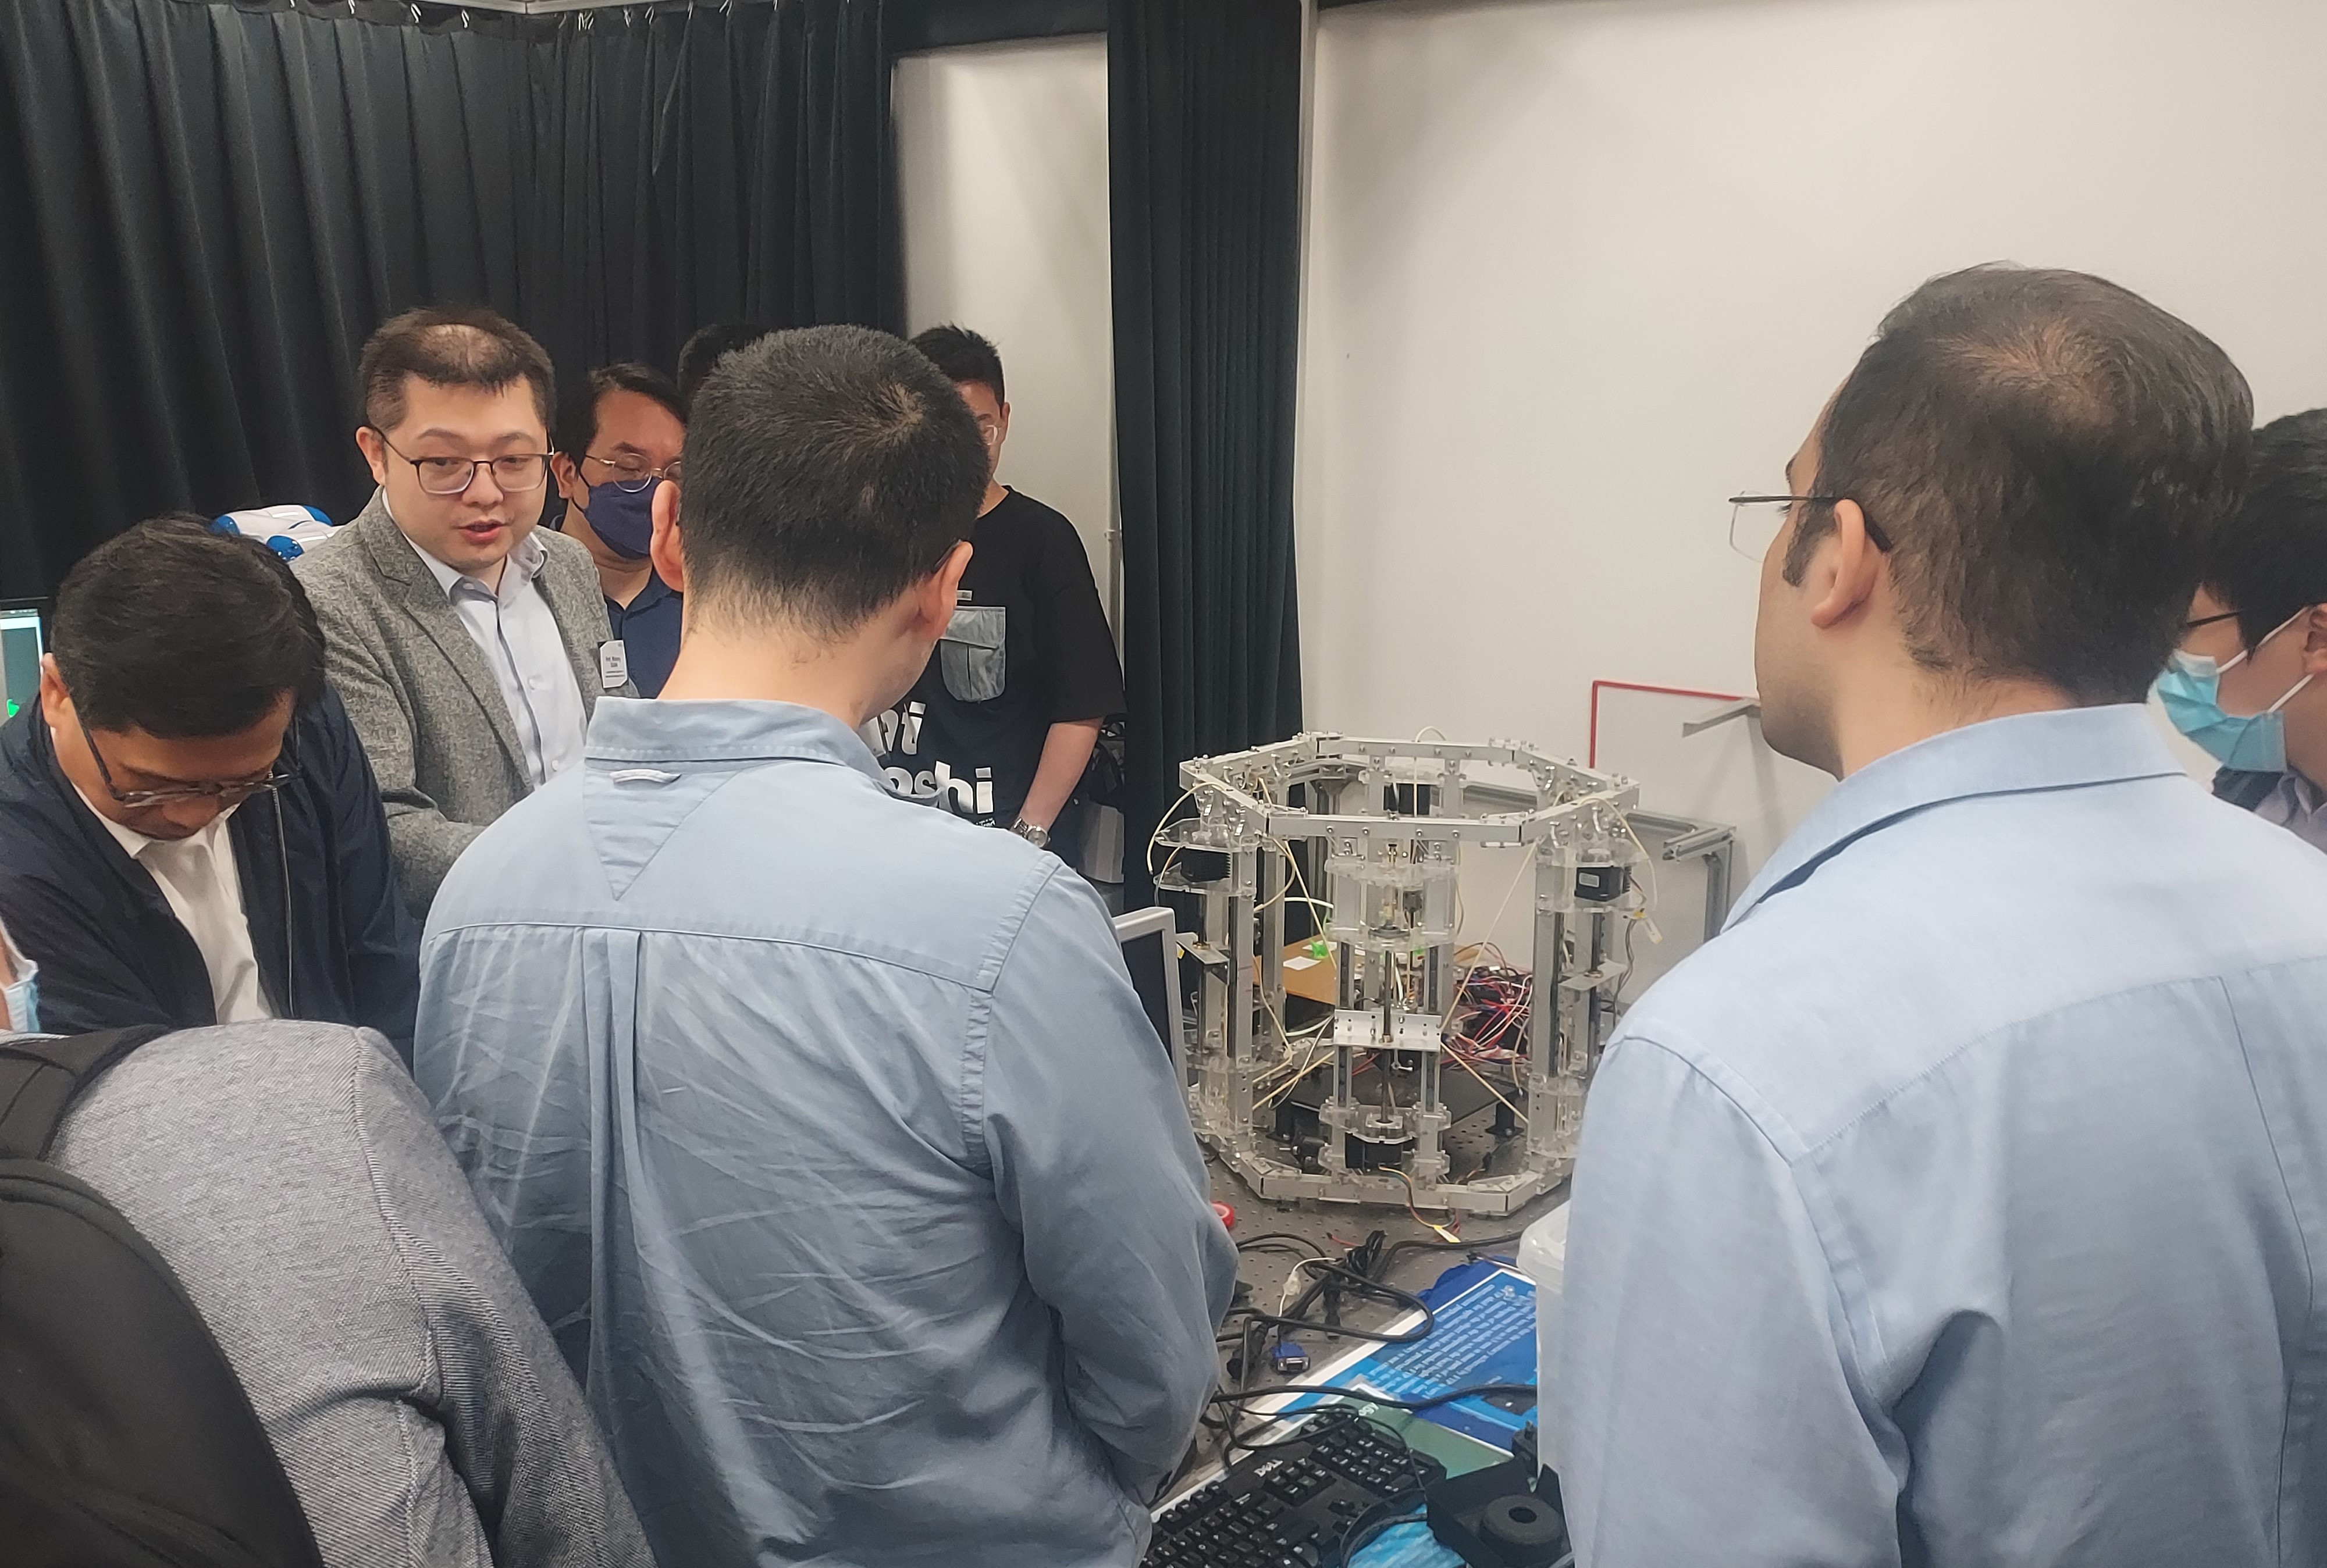 Lab visit led by Prof. Molong Duan on boom-lifted mounted robot